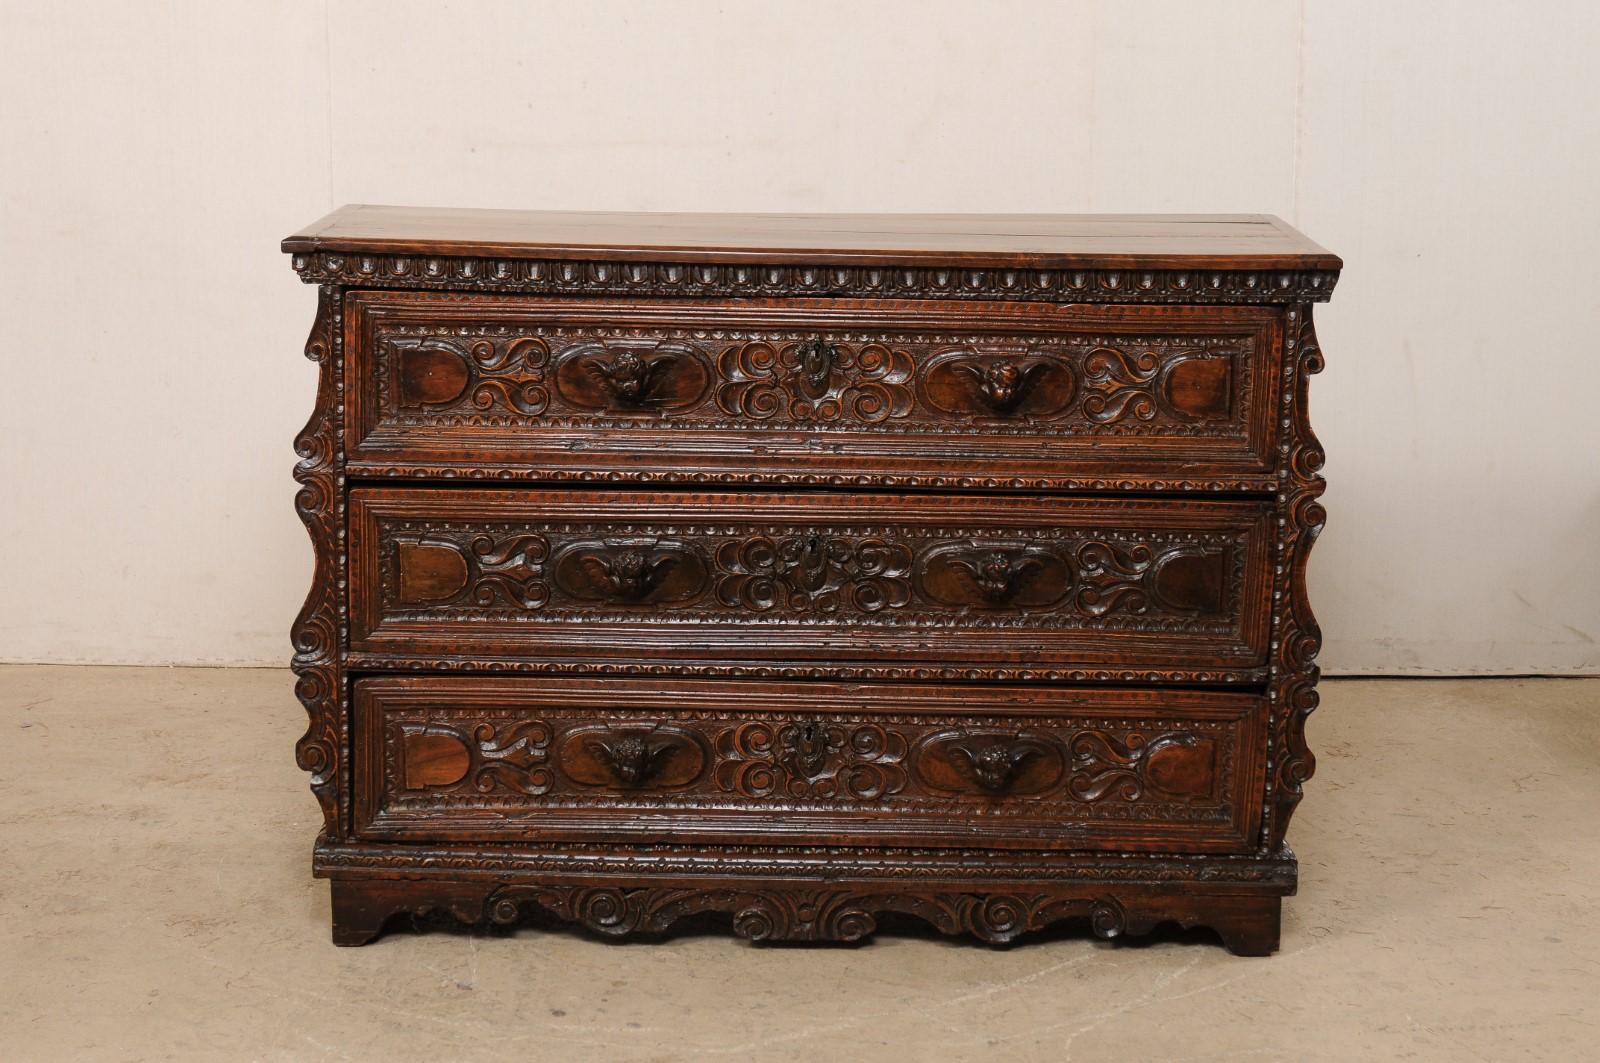 Early 18th C Italian Elaborately-Embellished Commode w/Putti Carved Drawer Pulls In Good Condition For Sale In Atlanta, GA